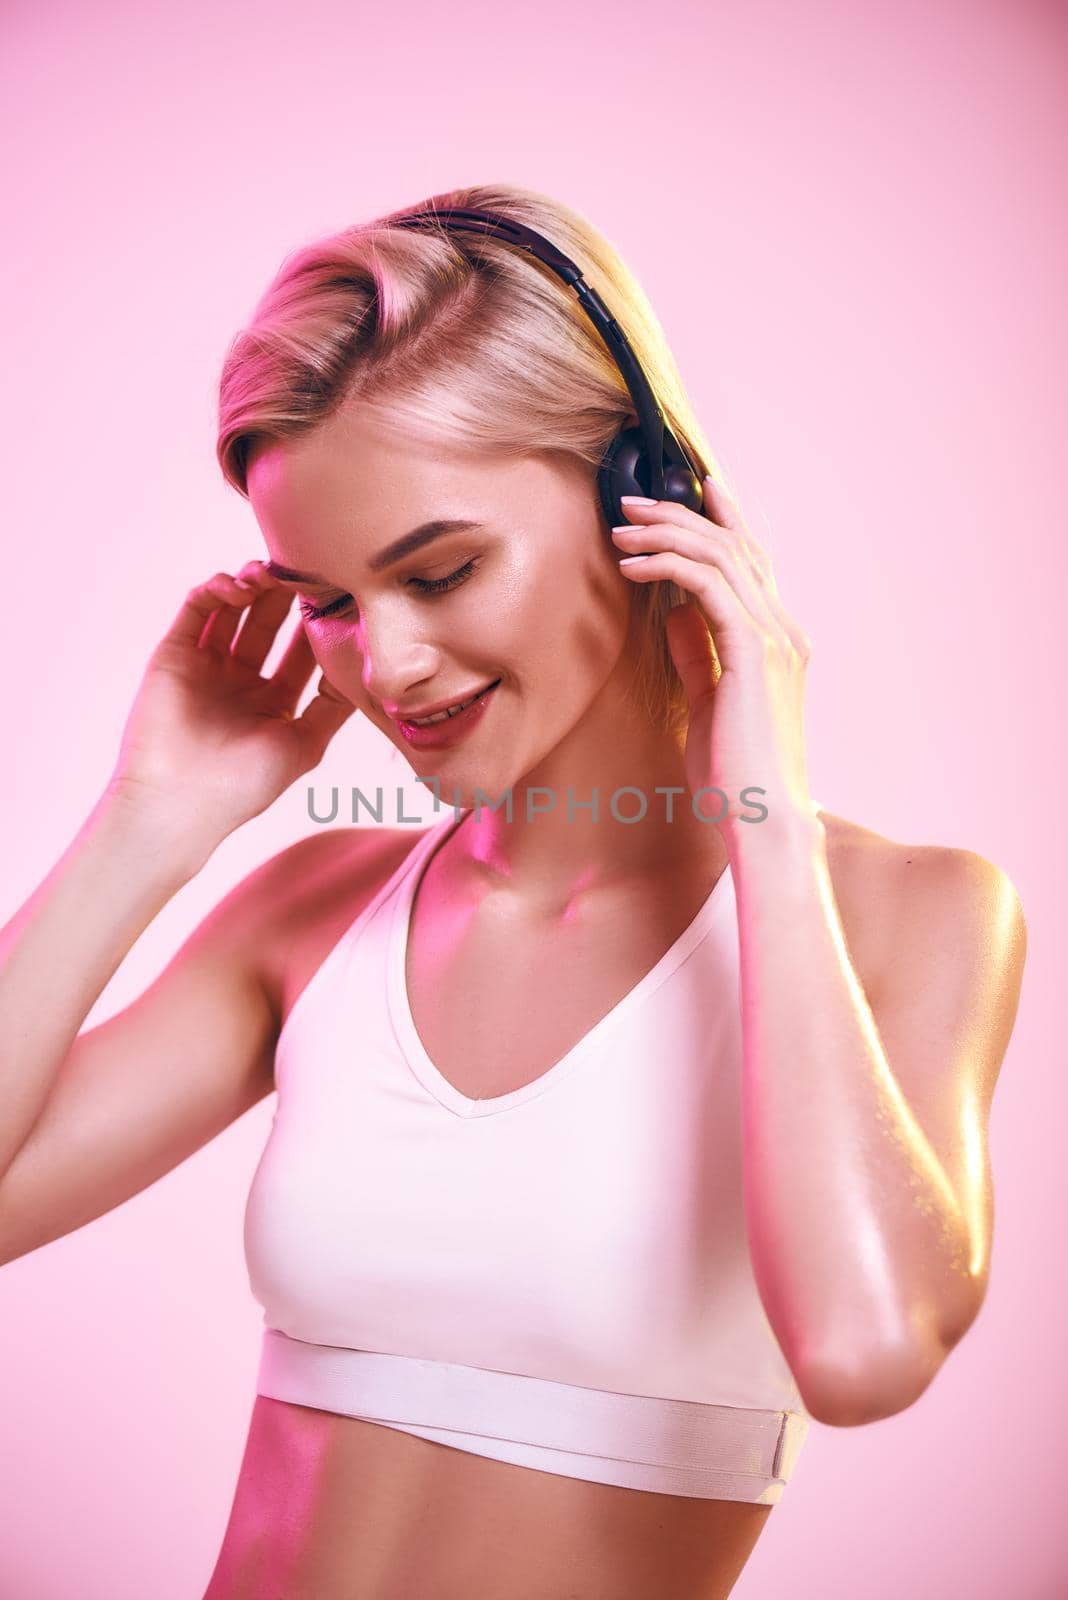 Enjoying music. Close up of cute and sporty woman in headphones listening music and smiling while standing against pink background by friendsstock